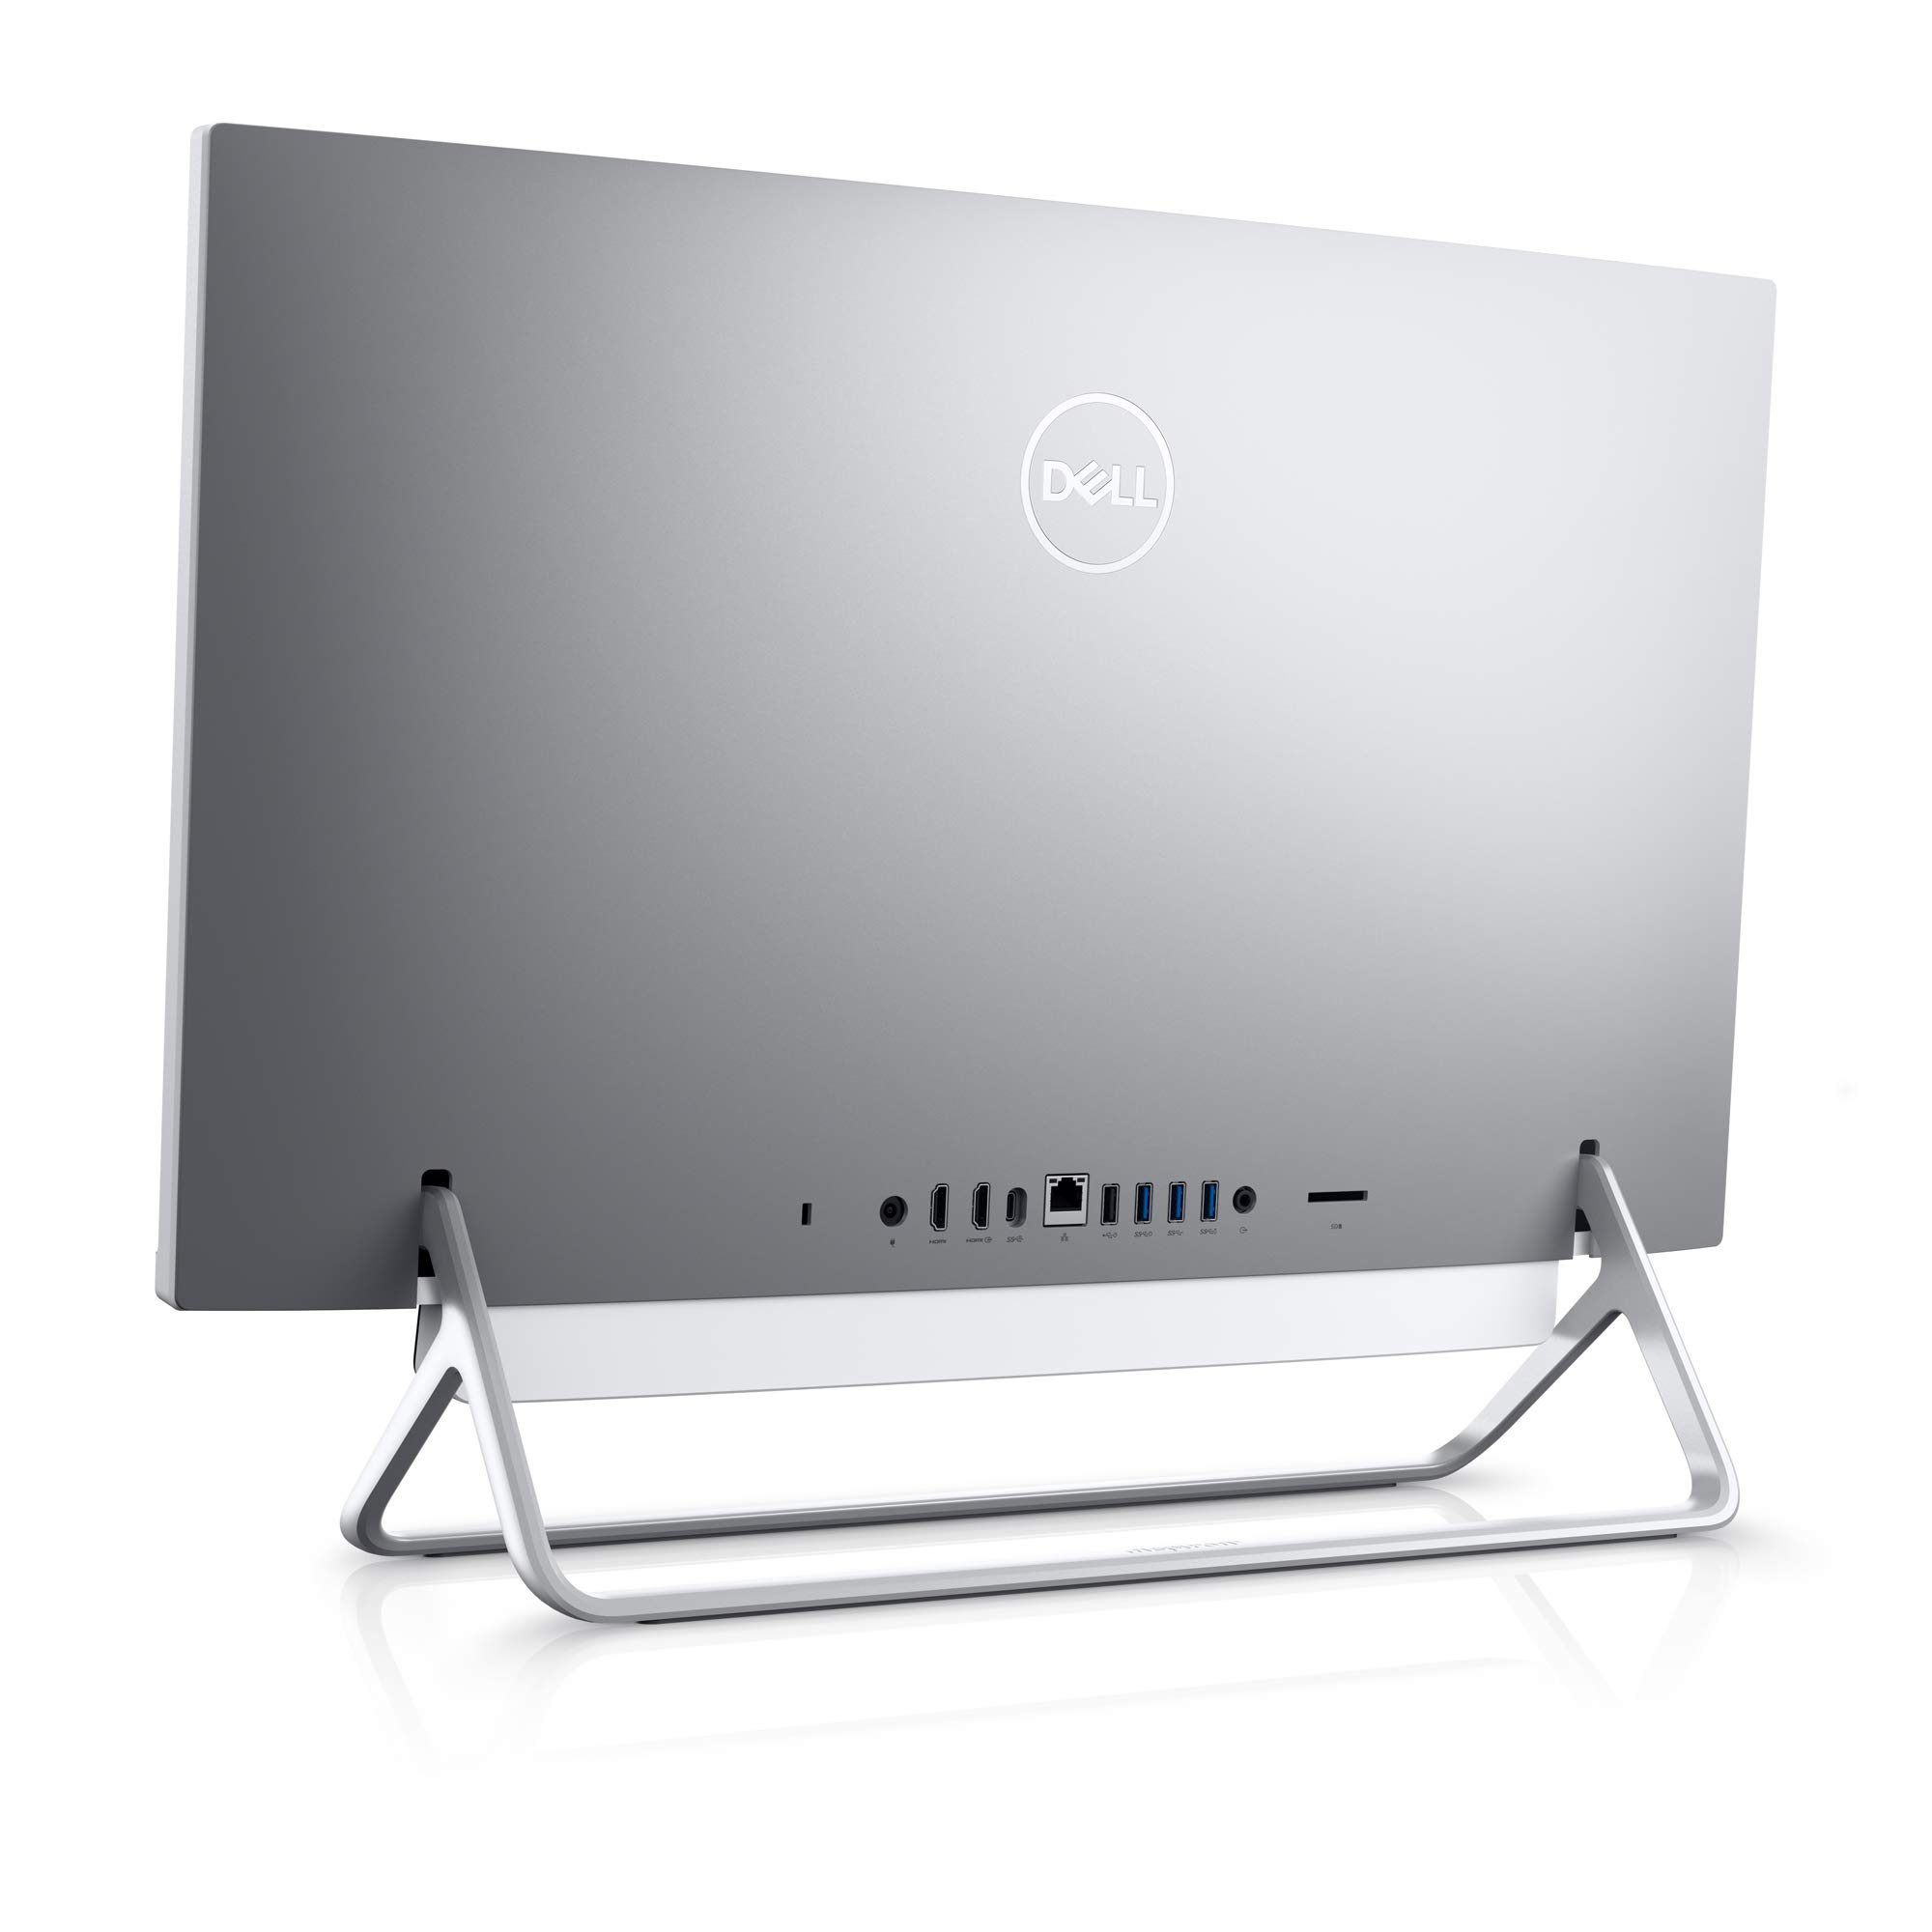 Dell Inspiron 7700 AIO Desktop, 27-inch FHD Infinity Touchscreen All in One - Intel Core i7-1165G7, 12GB 2666MHz DDR4 RAM, 1TB HDD + 256GB SSD, Iris XE Graphics, Windows 10 Home- Silver